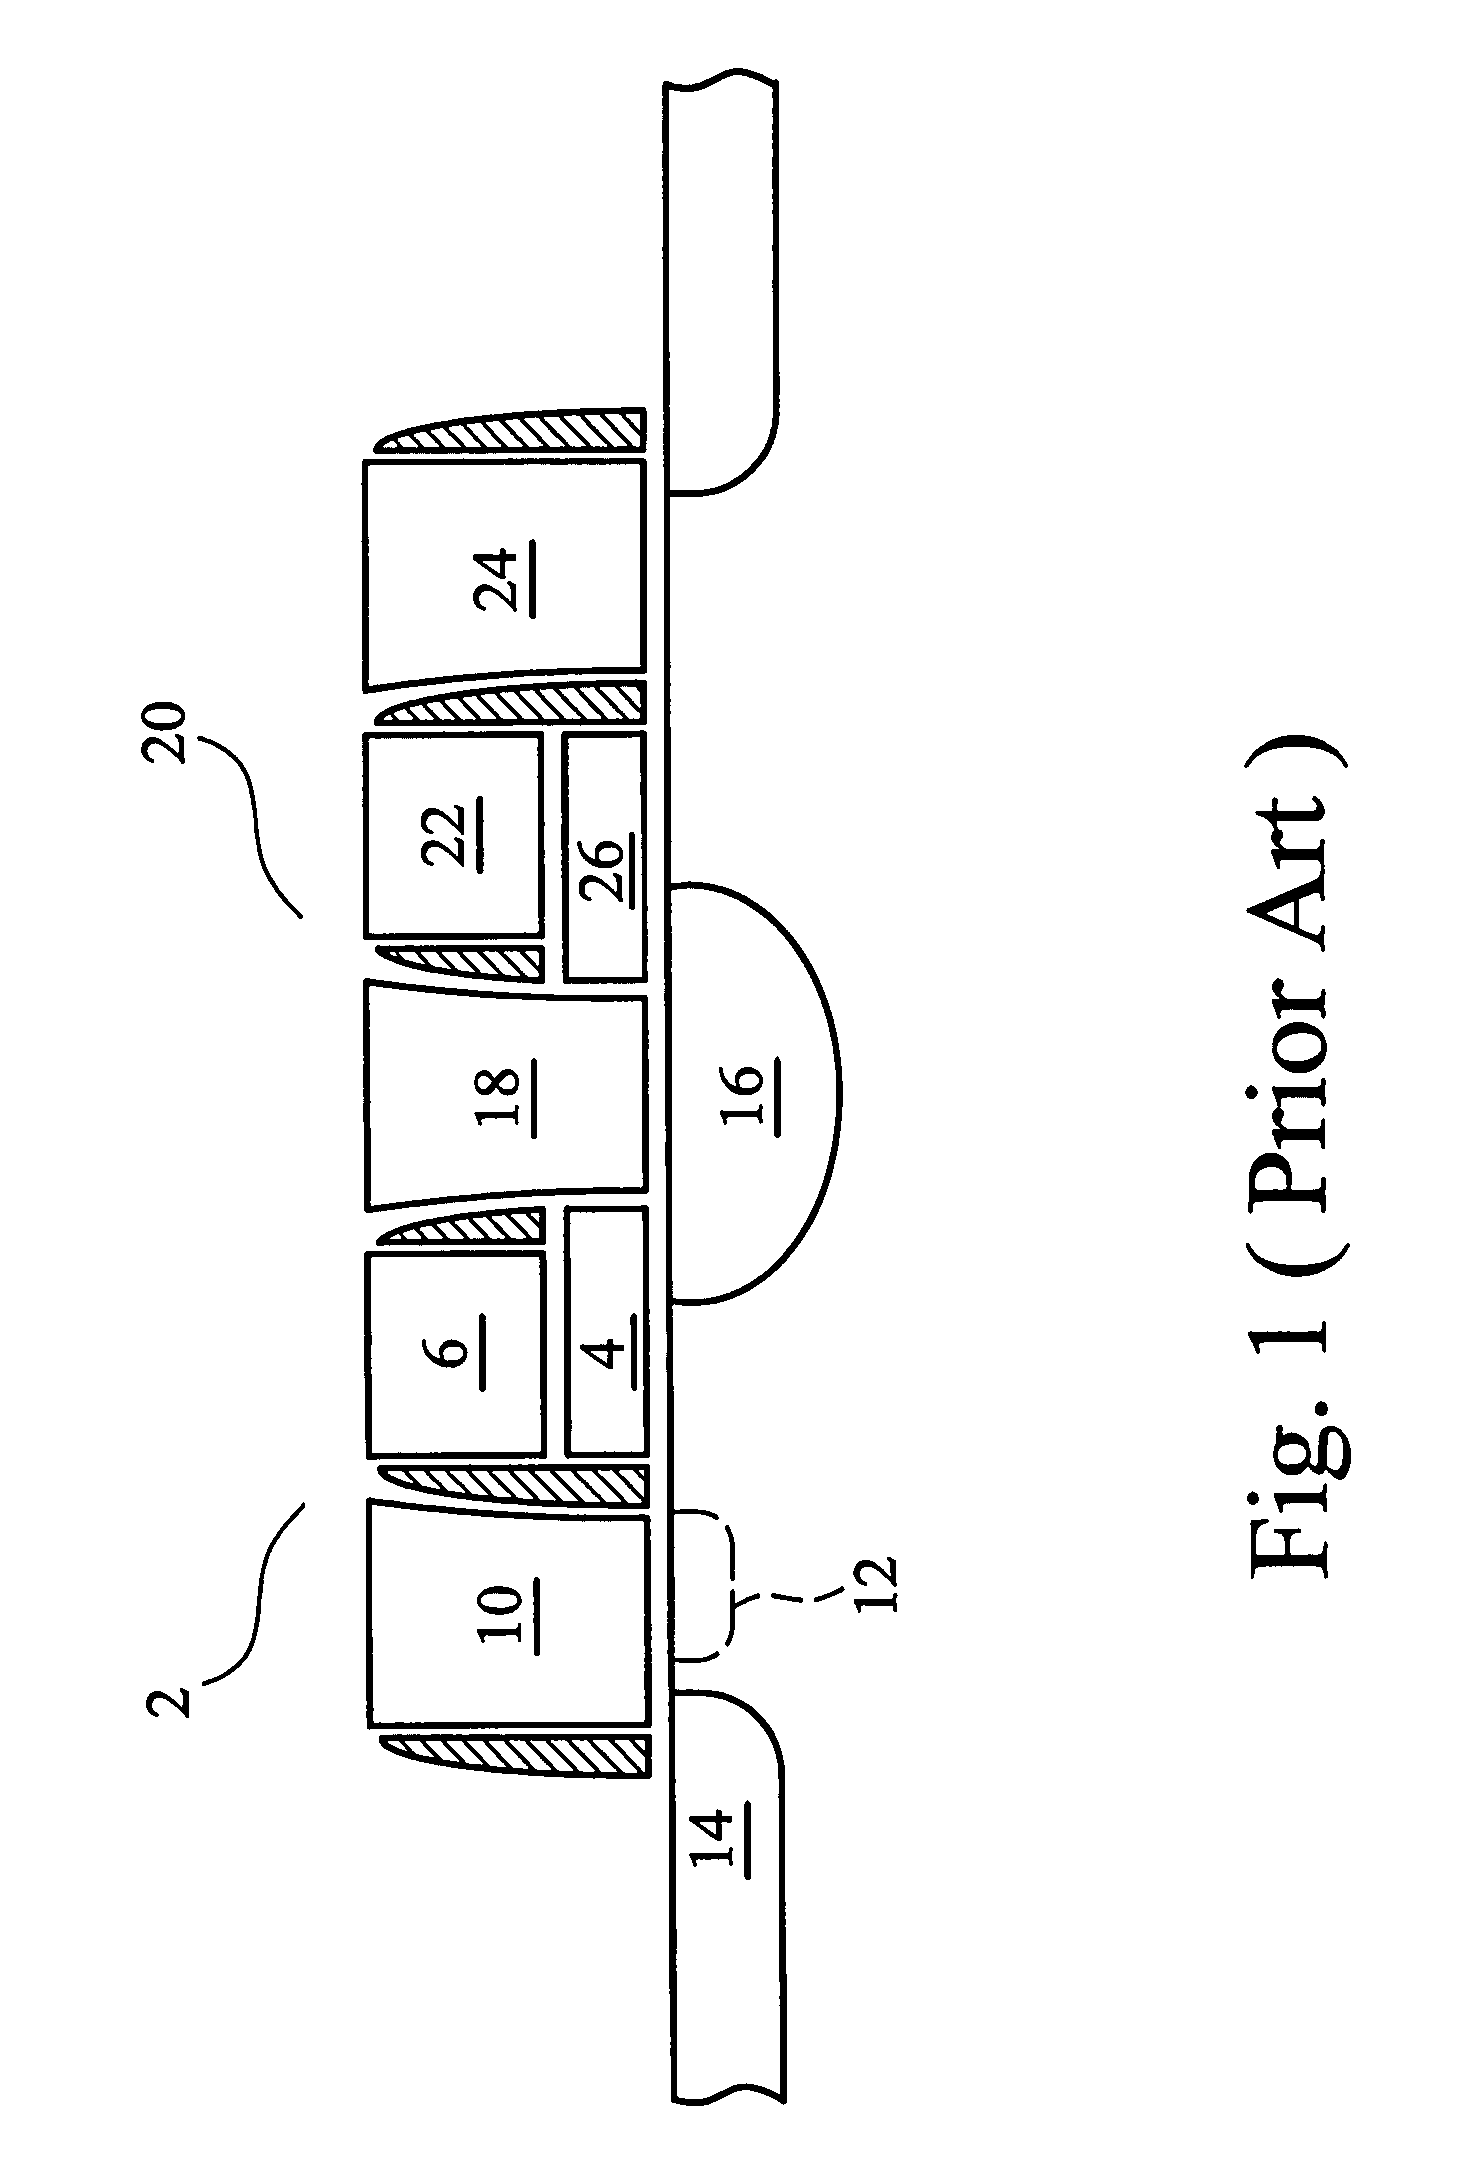 Program and erase methods and structures for byte-alterable flash memory